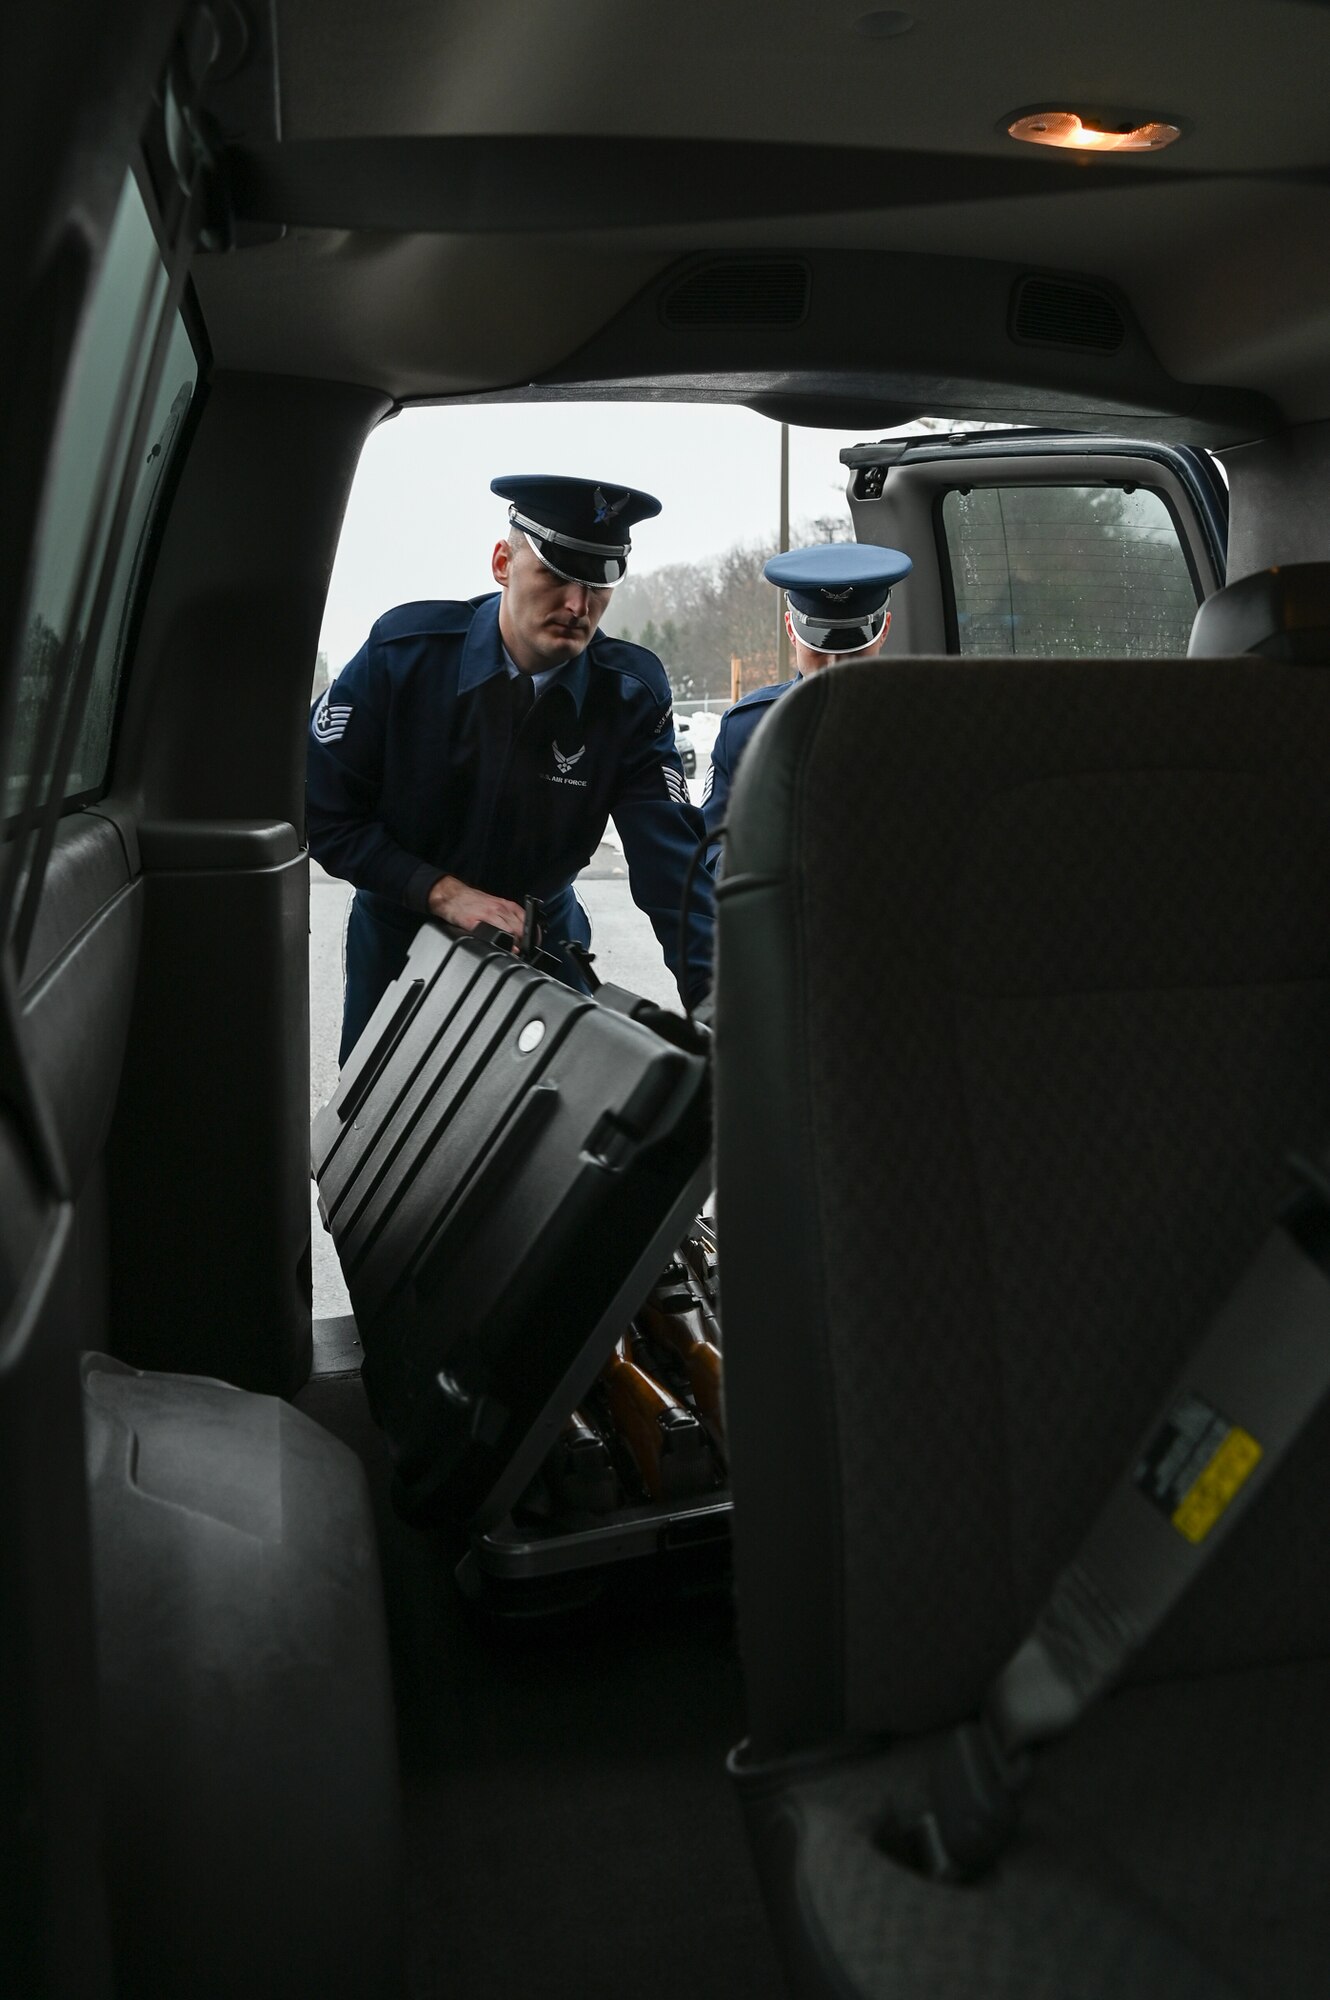 Tech. Sgt. Daniel Fox, left, and Tech. Sgt. Meldion Shehu, members of the Patriot Honor Guard at Hanscom Air Force Base, Mass., load equipment in a van for a military funeral detail in New York Dec. 9. Hanscom's Patriot Honor Guard provides funeral honor services in New England and Northeastern New York for active duty, retirees and veterans who served honorably in the United States Air Force. (U.S. Air Force photo by Mark Herlihy)